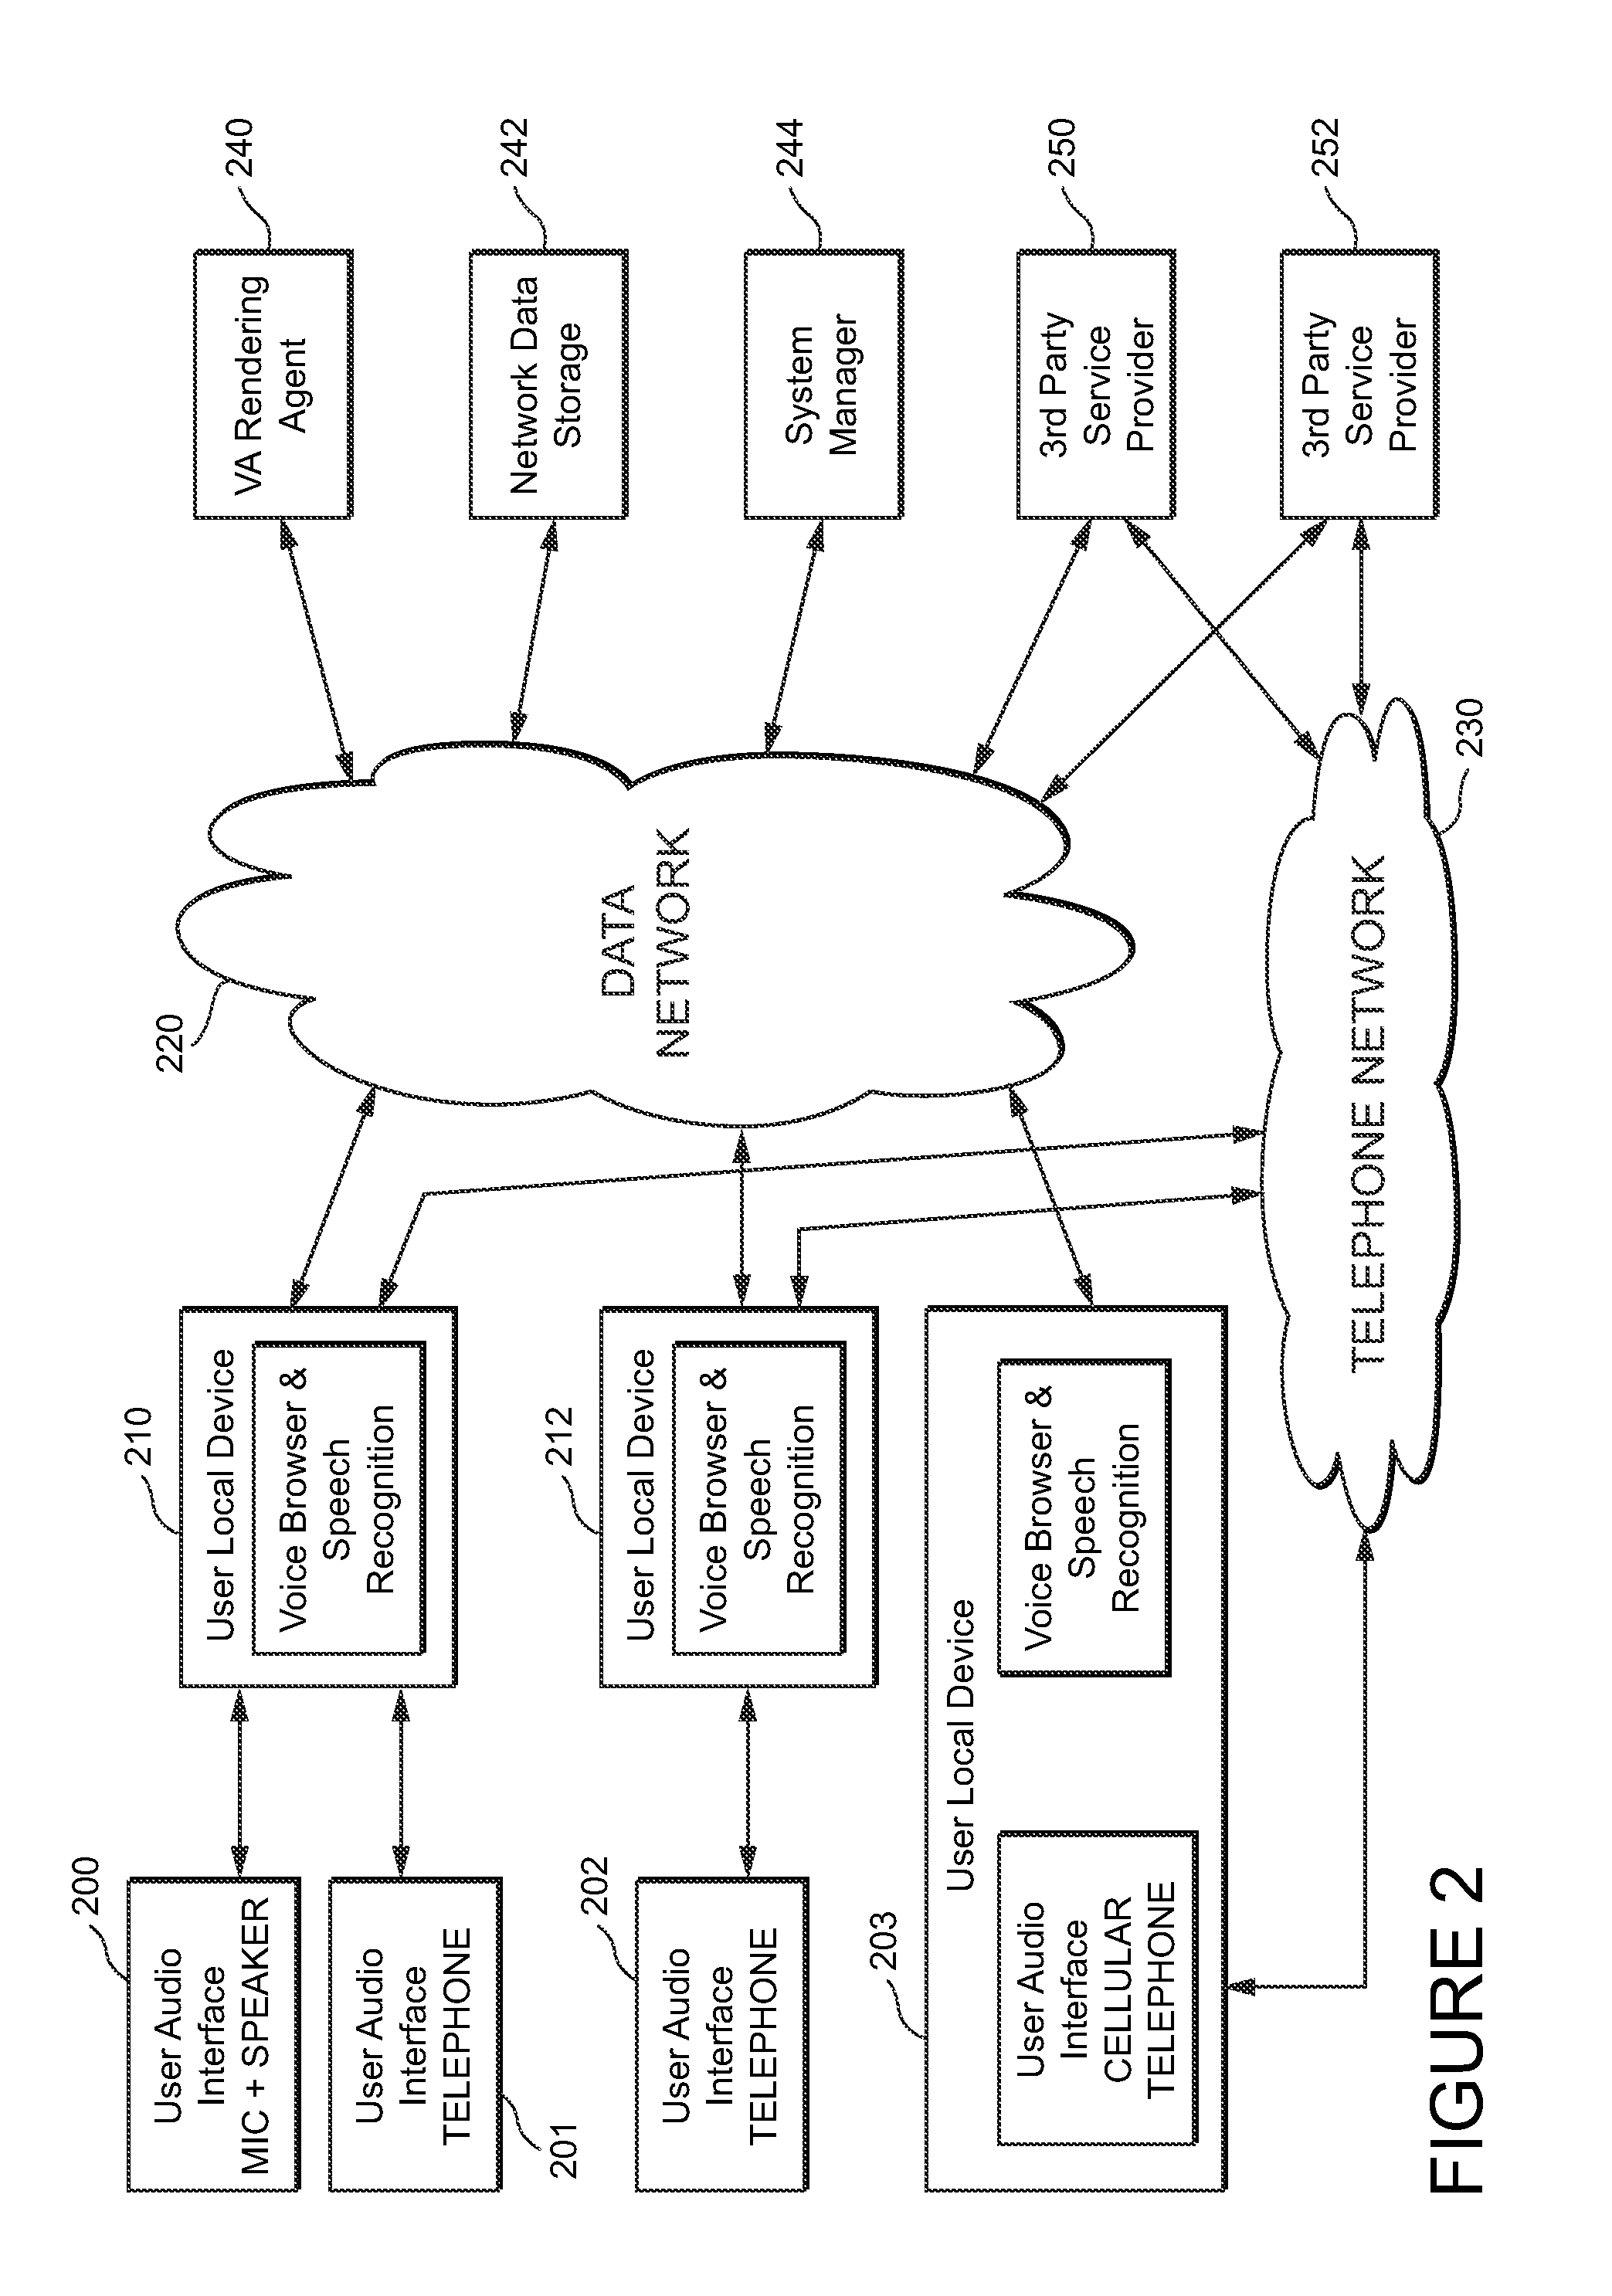 System and method for displaying the history of a user's interaction with a voice application